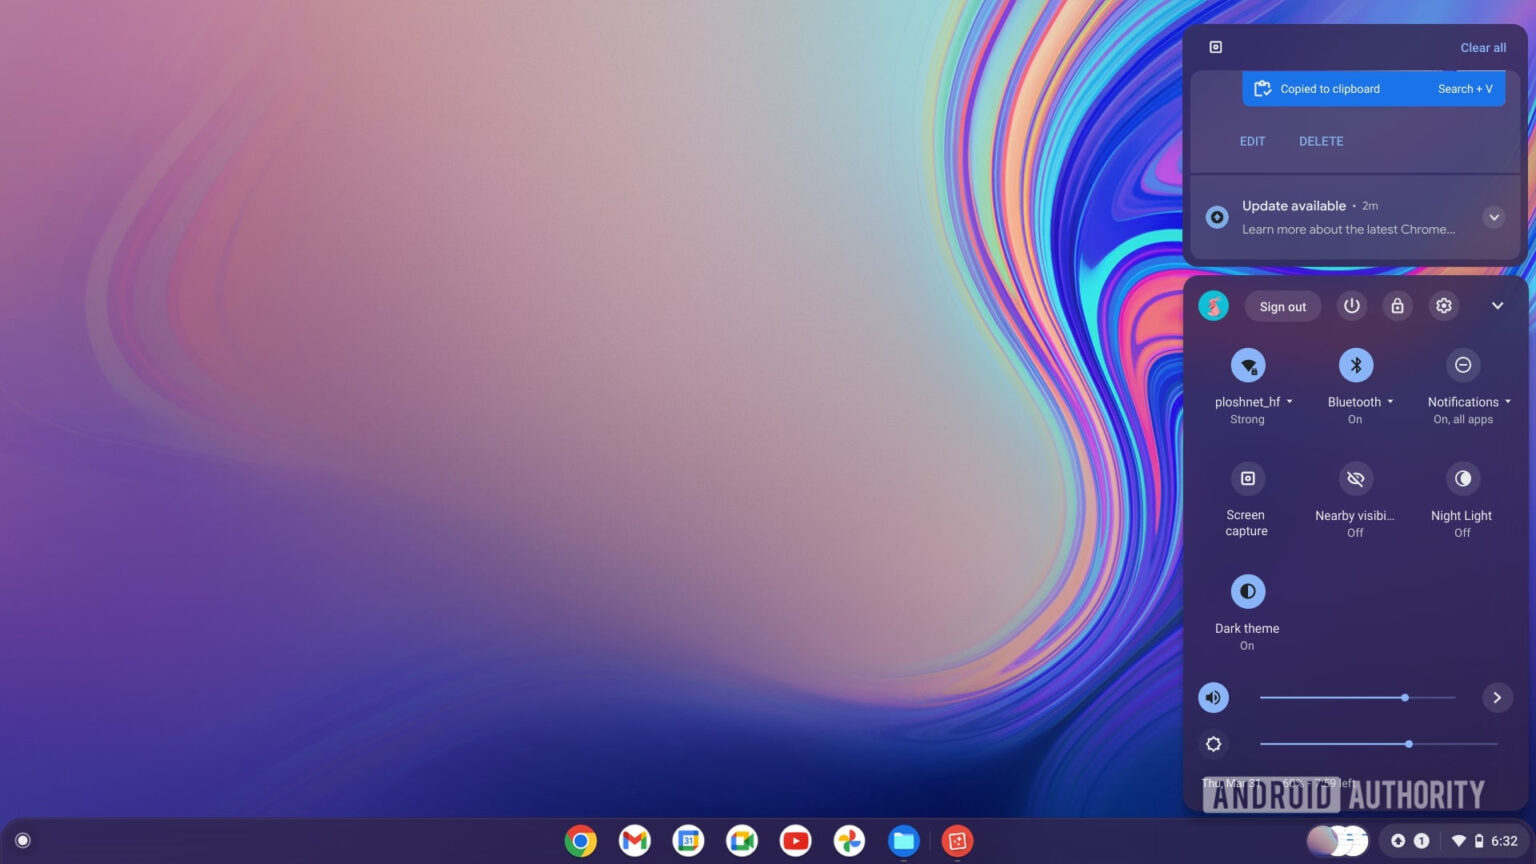 Chrome OS dark mode: Here's how to enable it